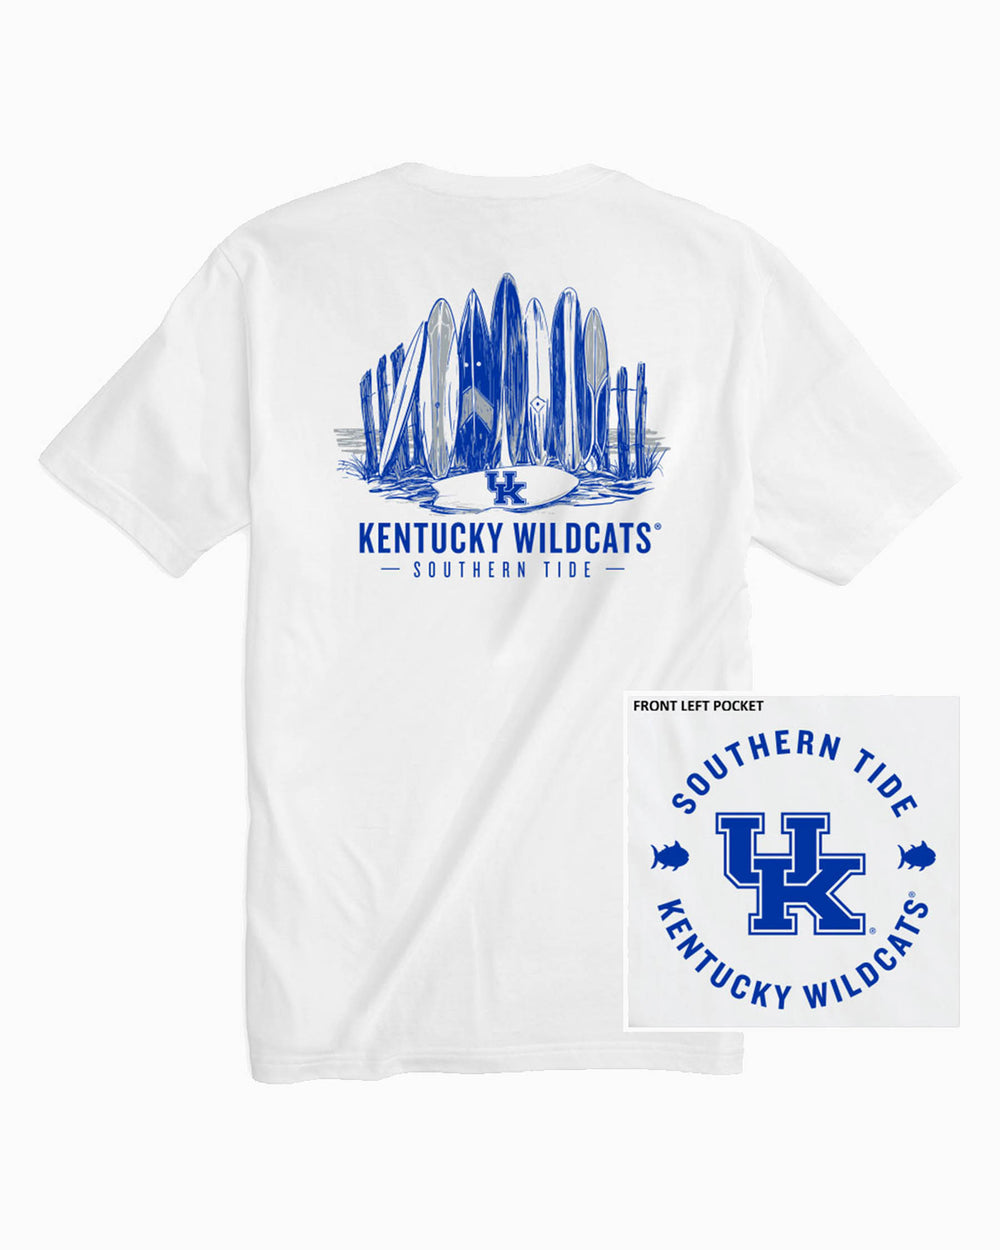 The front and back view of the Kentucky Wildcats Surfboard Row T-Shirt by Southern Tide - Classic White